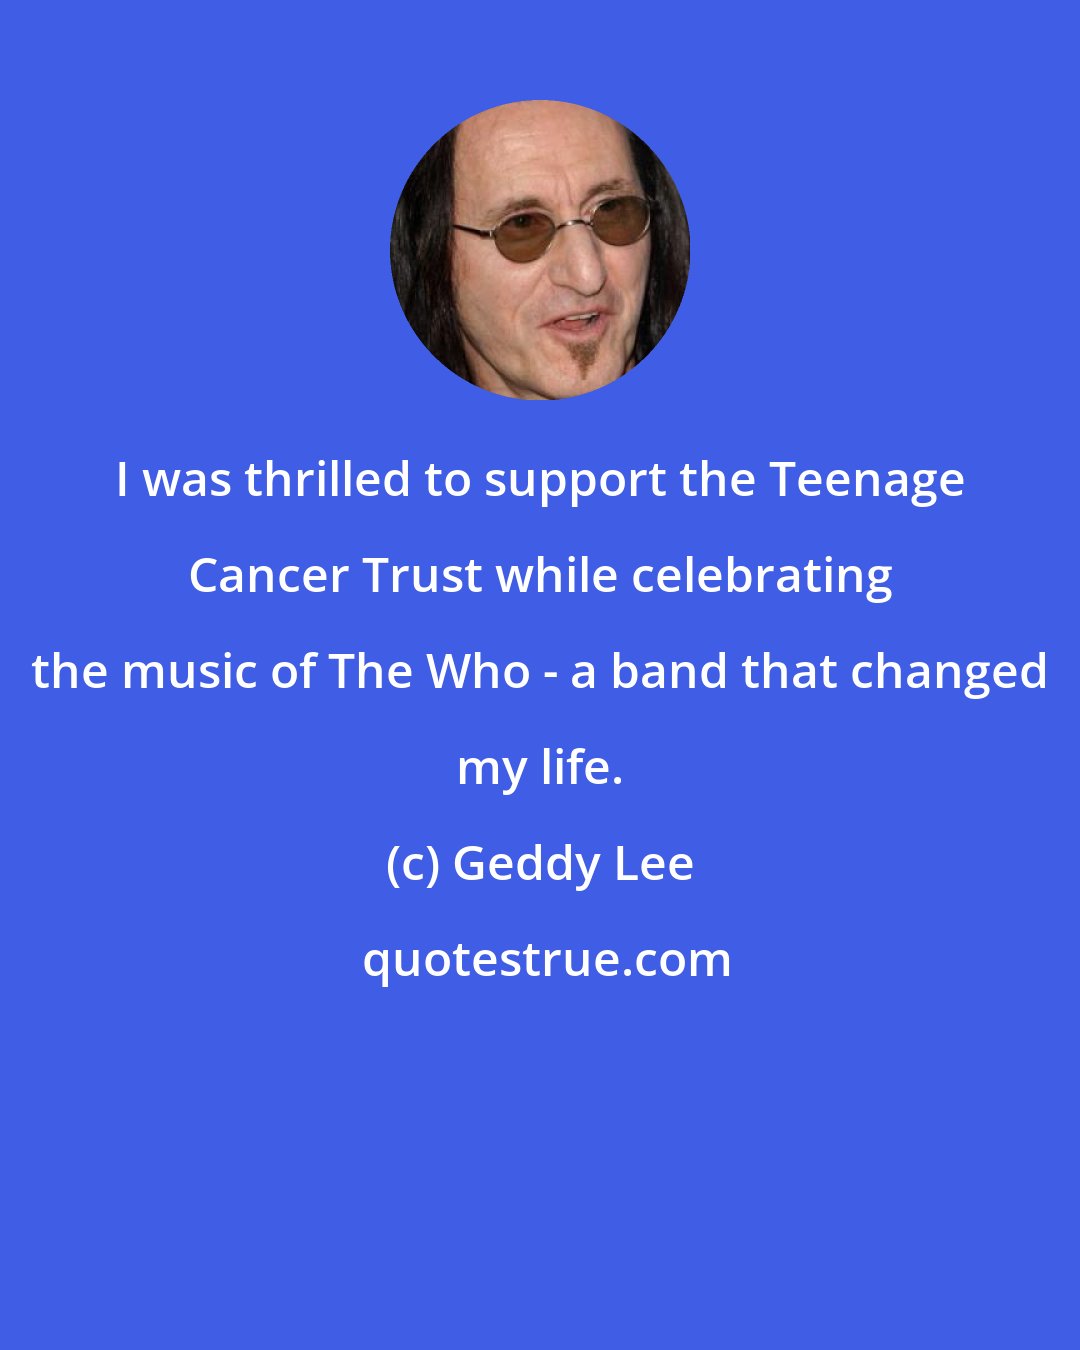 Geddy Lee: I was thrilled to support the Teenage Cancer Trust while celebrating the music of The Who - a band that changed my life.